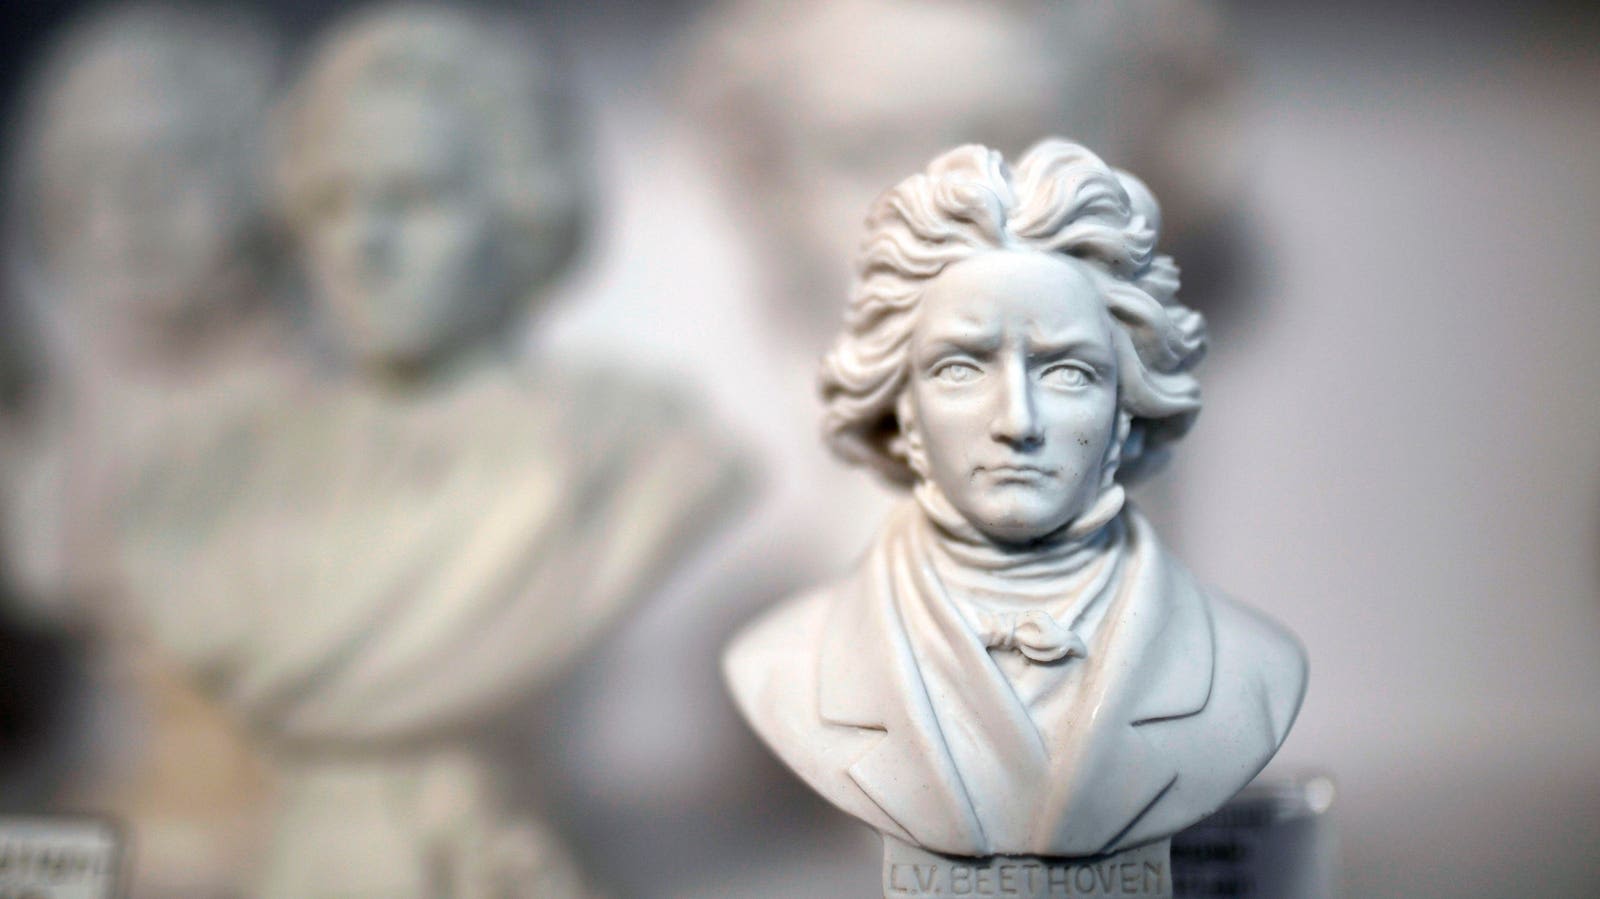 Beethoven’s Hair Reveals New Clues About His Deafness And Other Ills